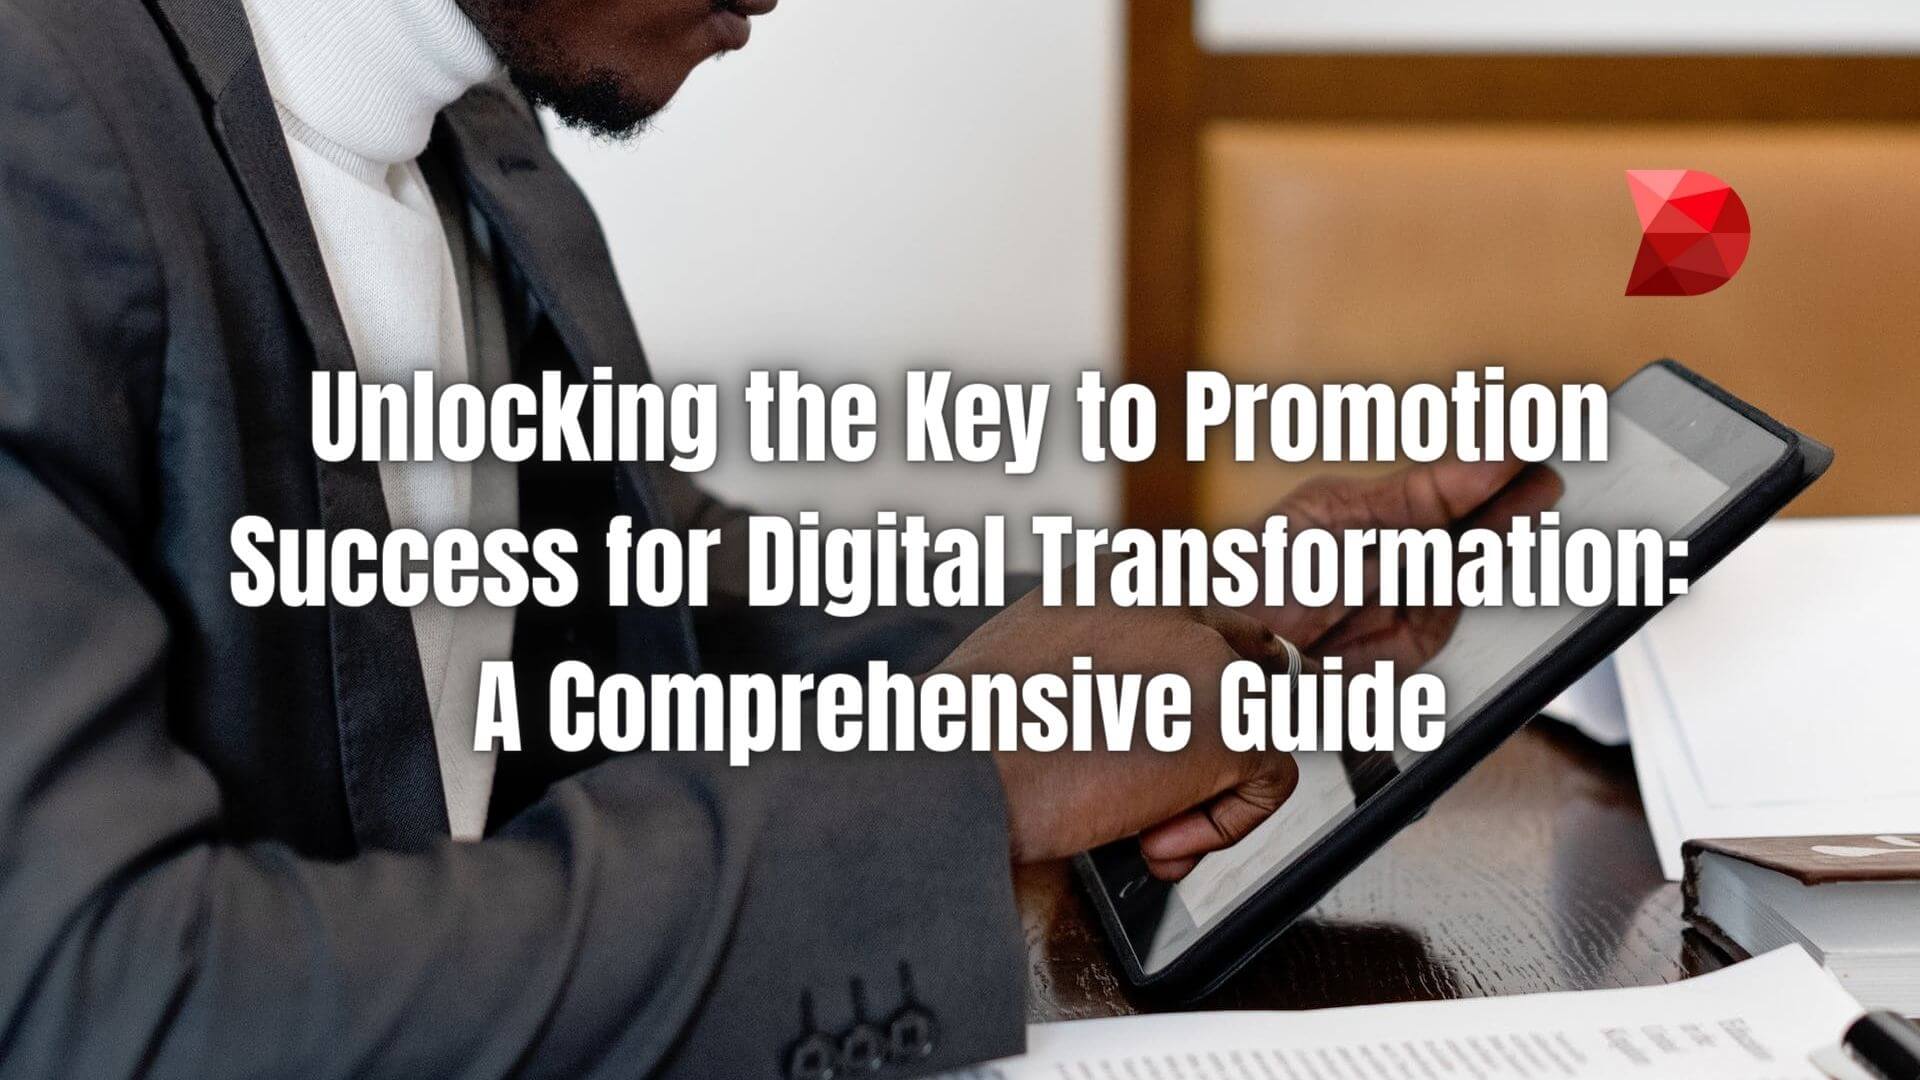 Achieve promotion success in digital transformation. Click here to learn the keys in this comprehensive guide!